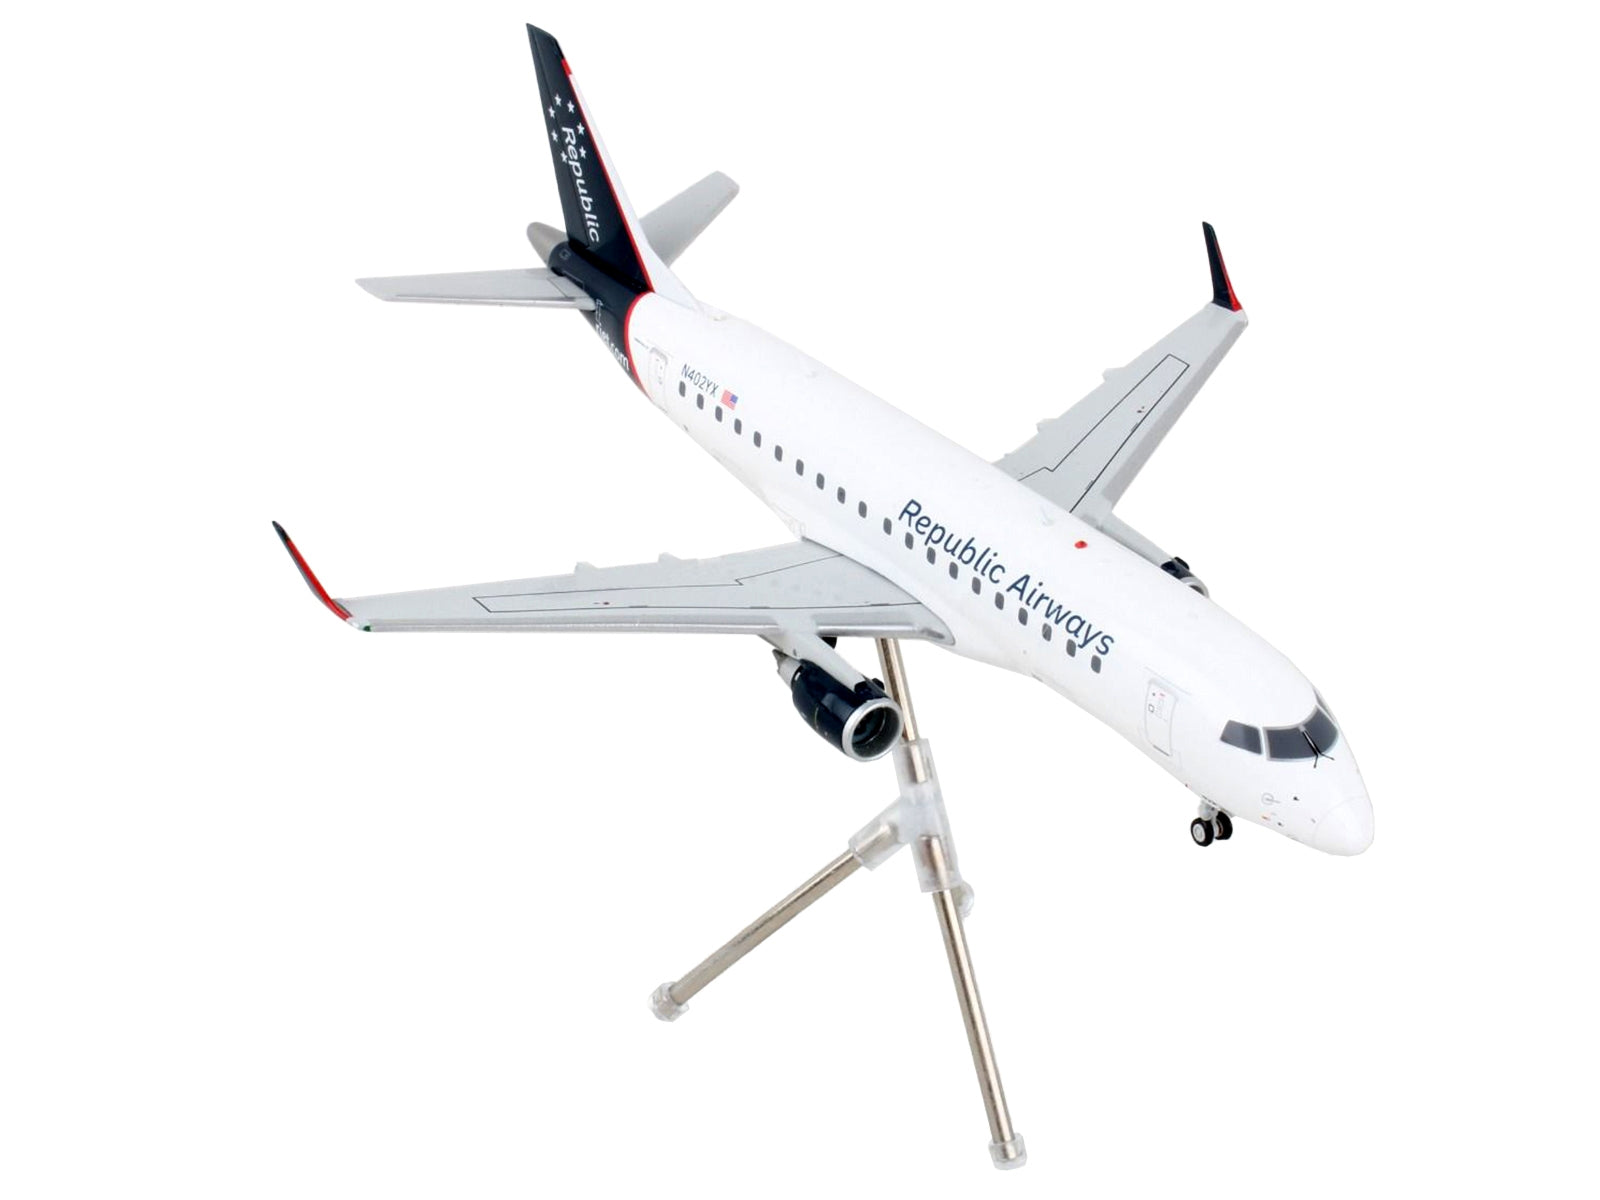 Embraer ERJ-175 Commercial Aircraft "Republic Airways" White with Blue Tail "Gemini 200" Series 1/200 Diecast Model Airplane by GeminiJets